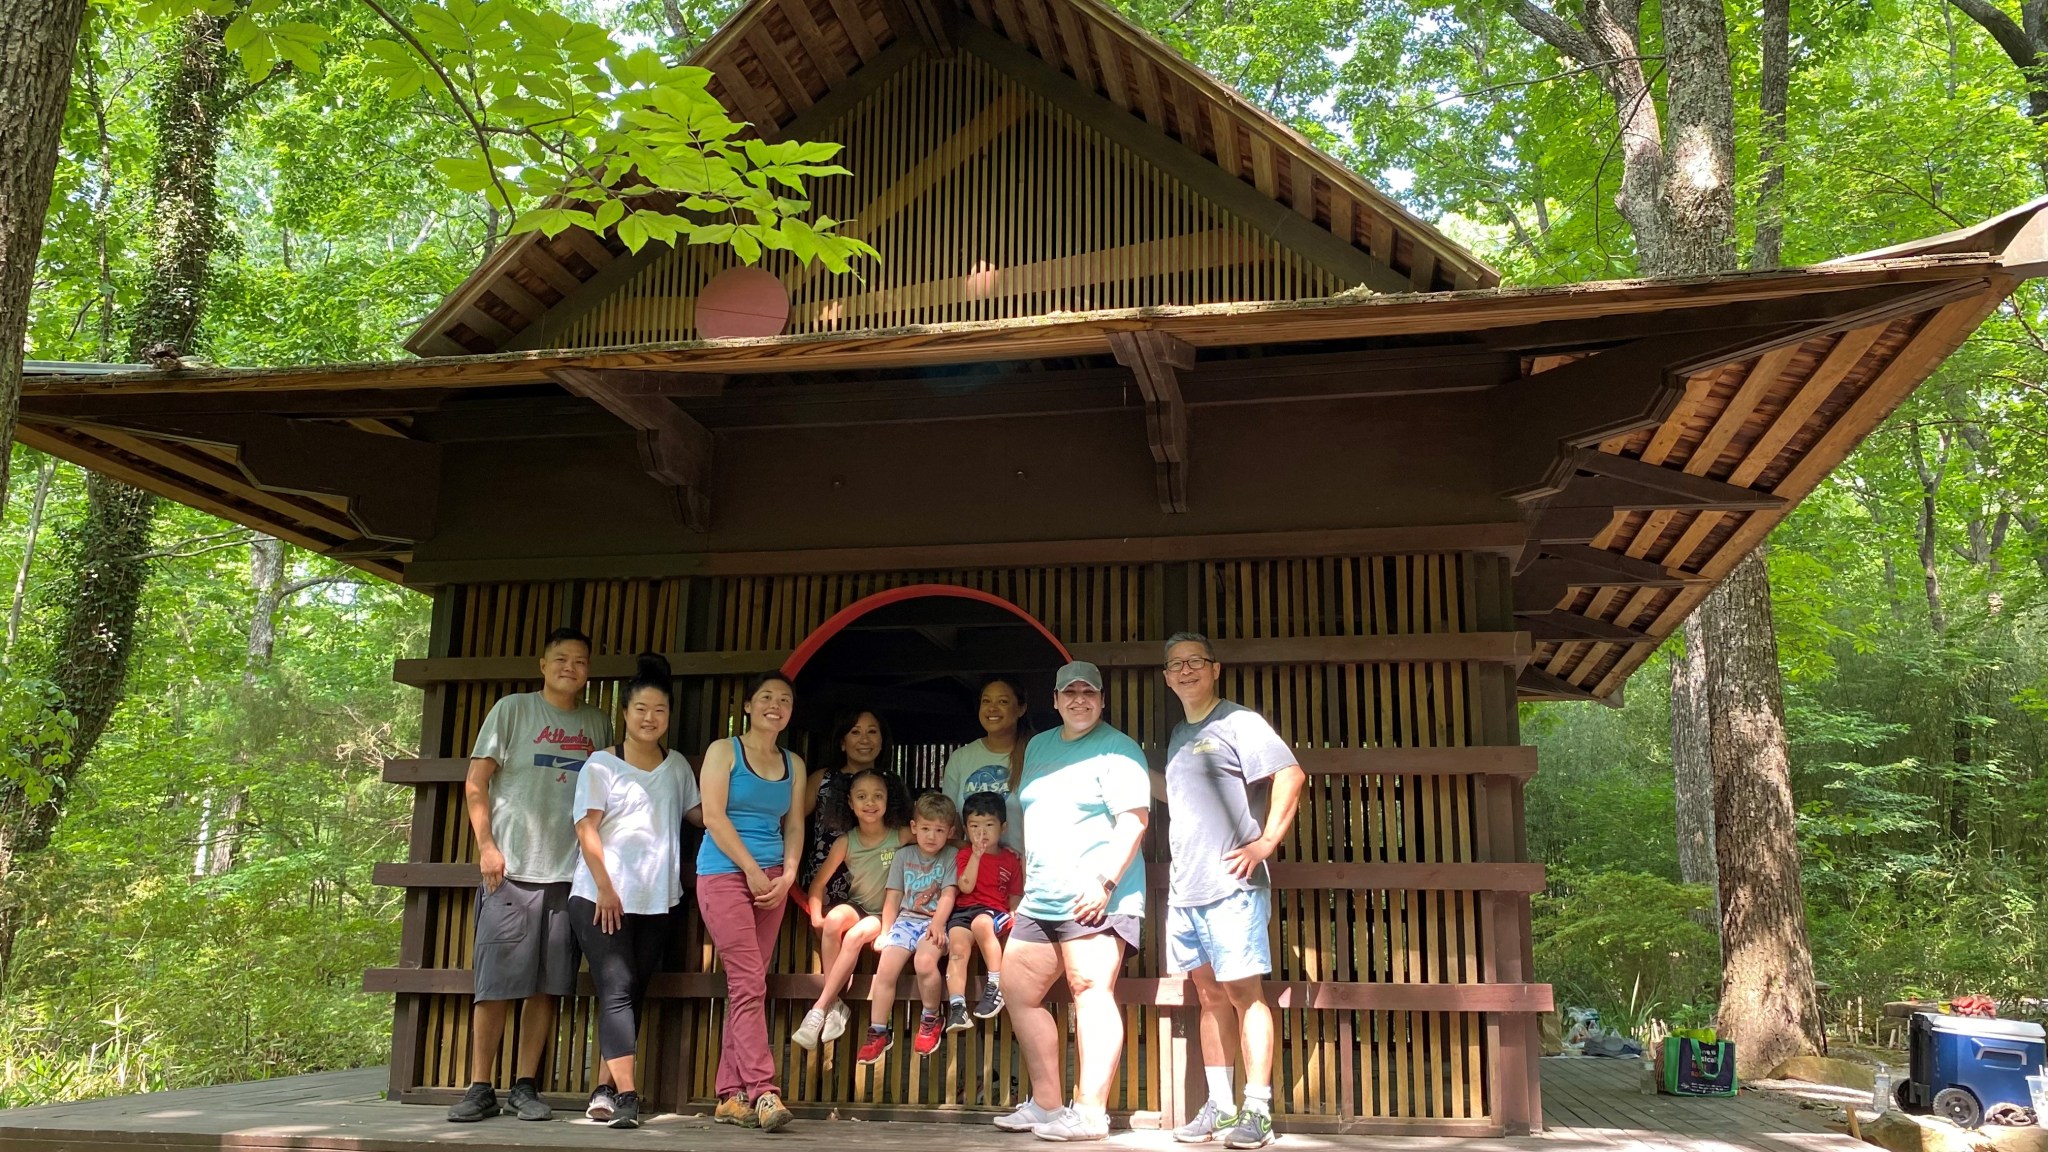 MAARS members gather at the Tea House in Monte Sano State Parks North Alabama Japanese Garden during an outreach activity in May 2022.